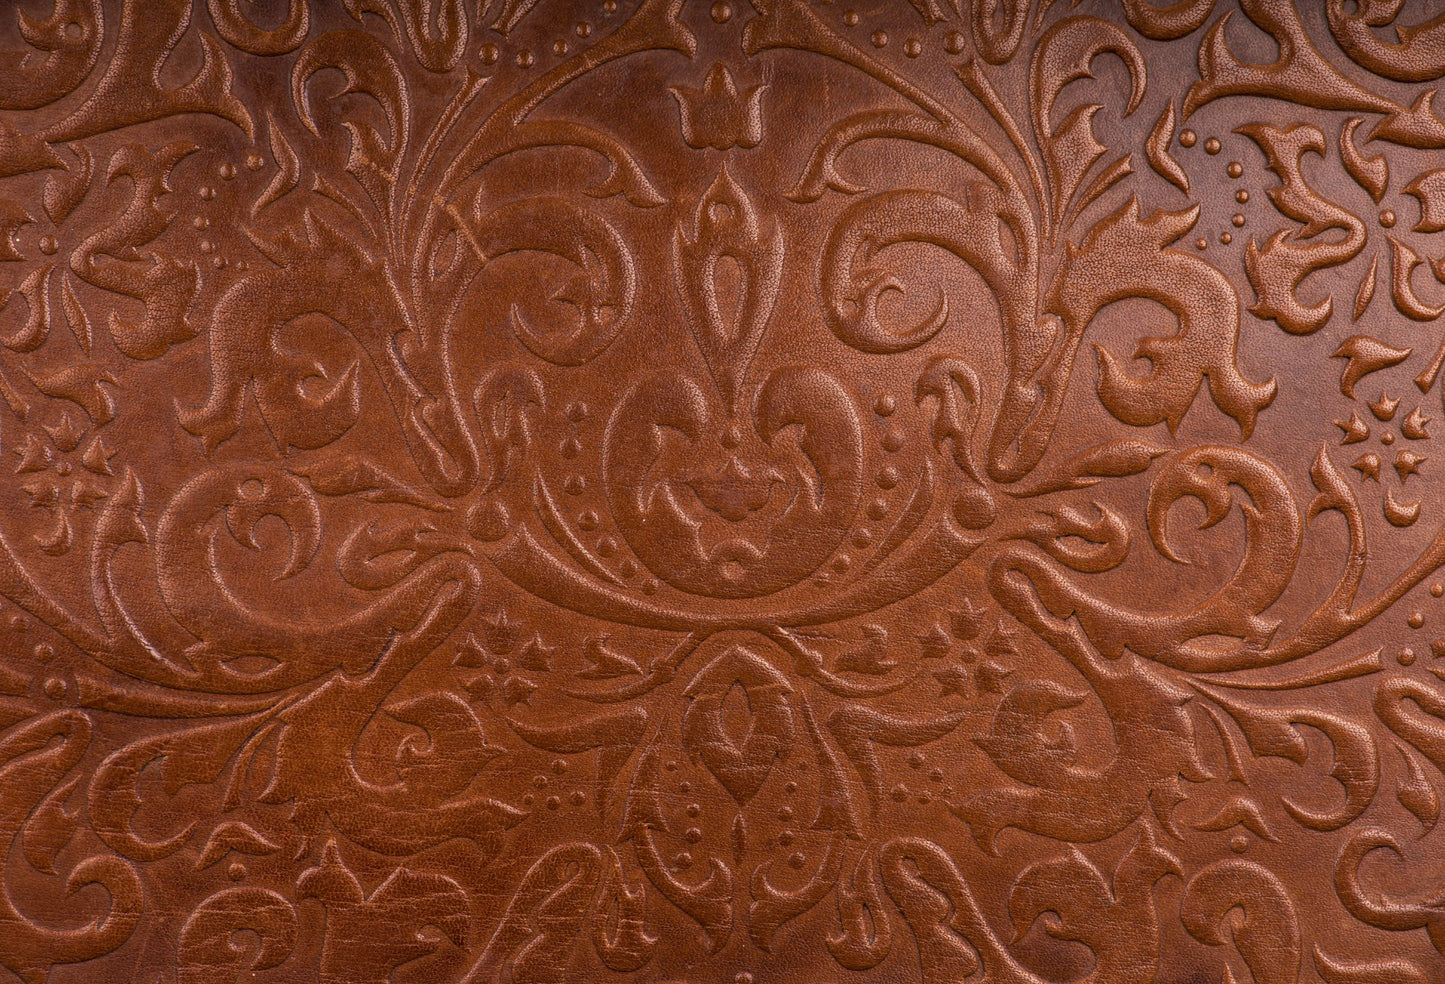 Brown Floral Tooled Leather - Adhesive Vinyl Wrap